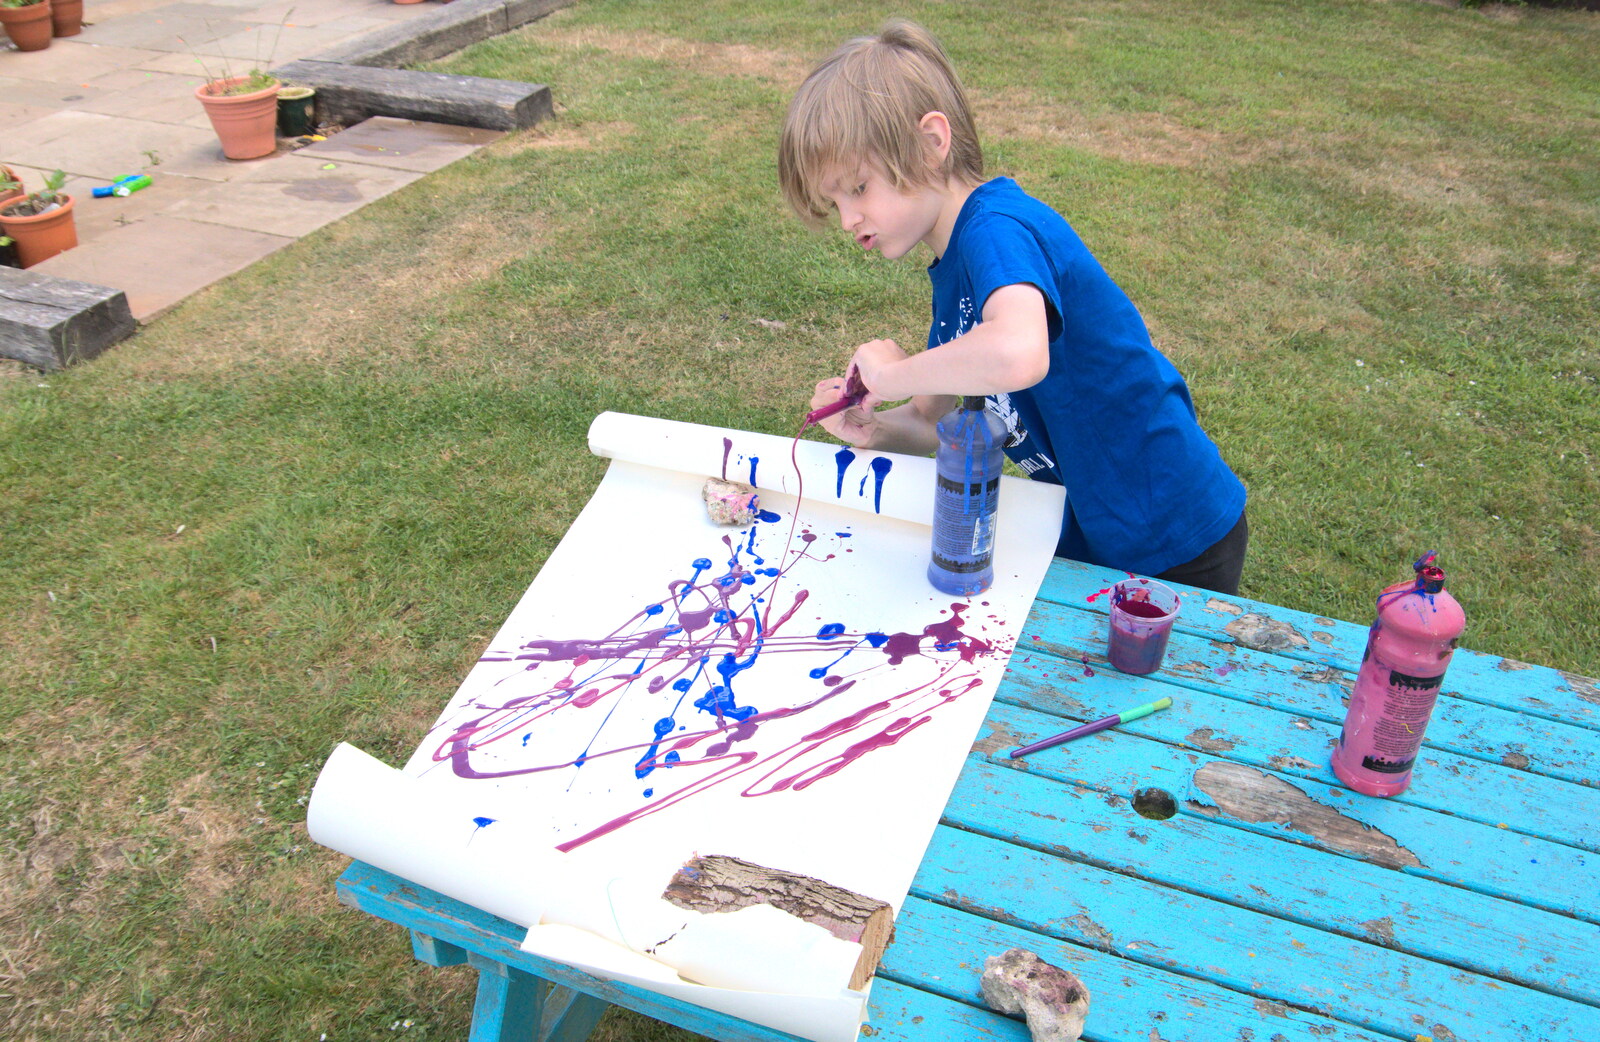 Harry gets all kinetic with paint from More Lockdown Fun, Diss and Eye, Norfolk and Suffolk - 30th May 2020